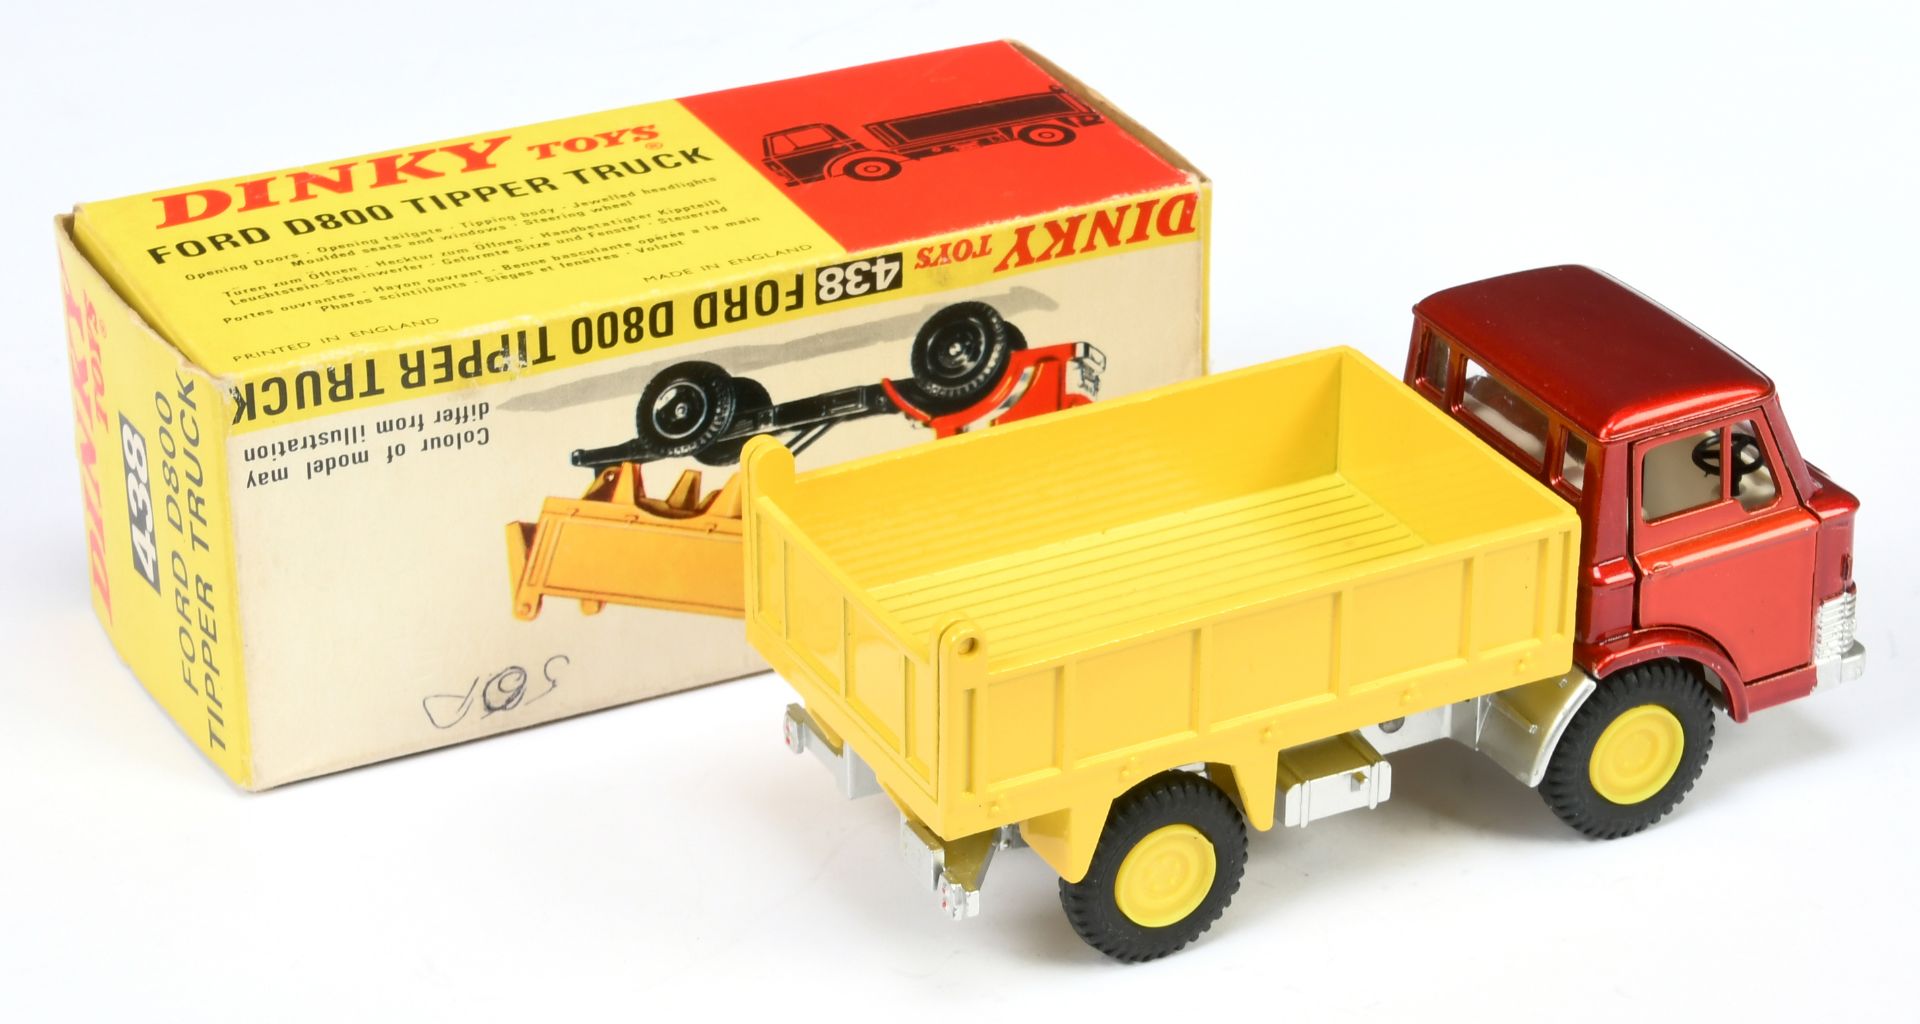 Dinky Toys 438 Ford D800 Tipper Truck - Metallic red cab, bright yellow back, silver chassis, whi... - Bild 2 aus 2